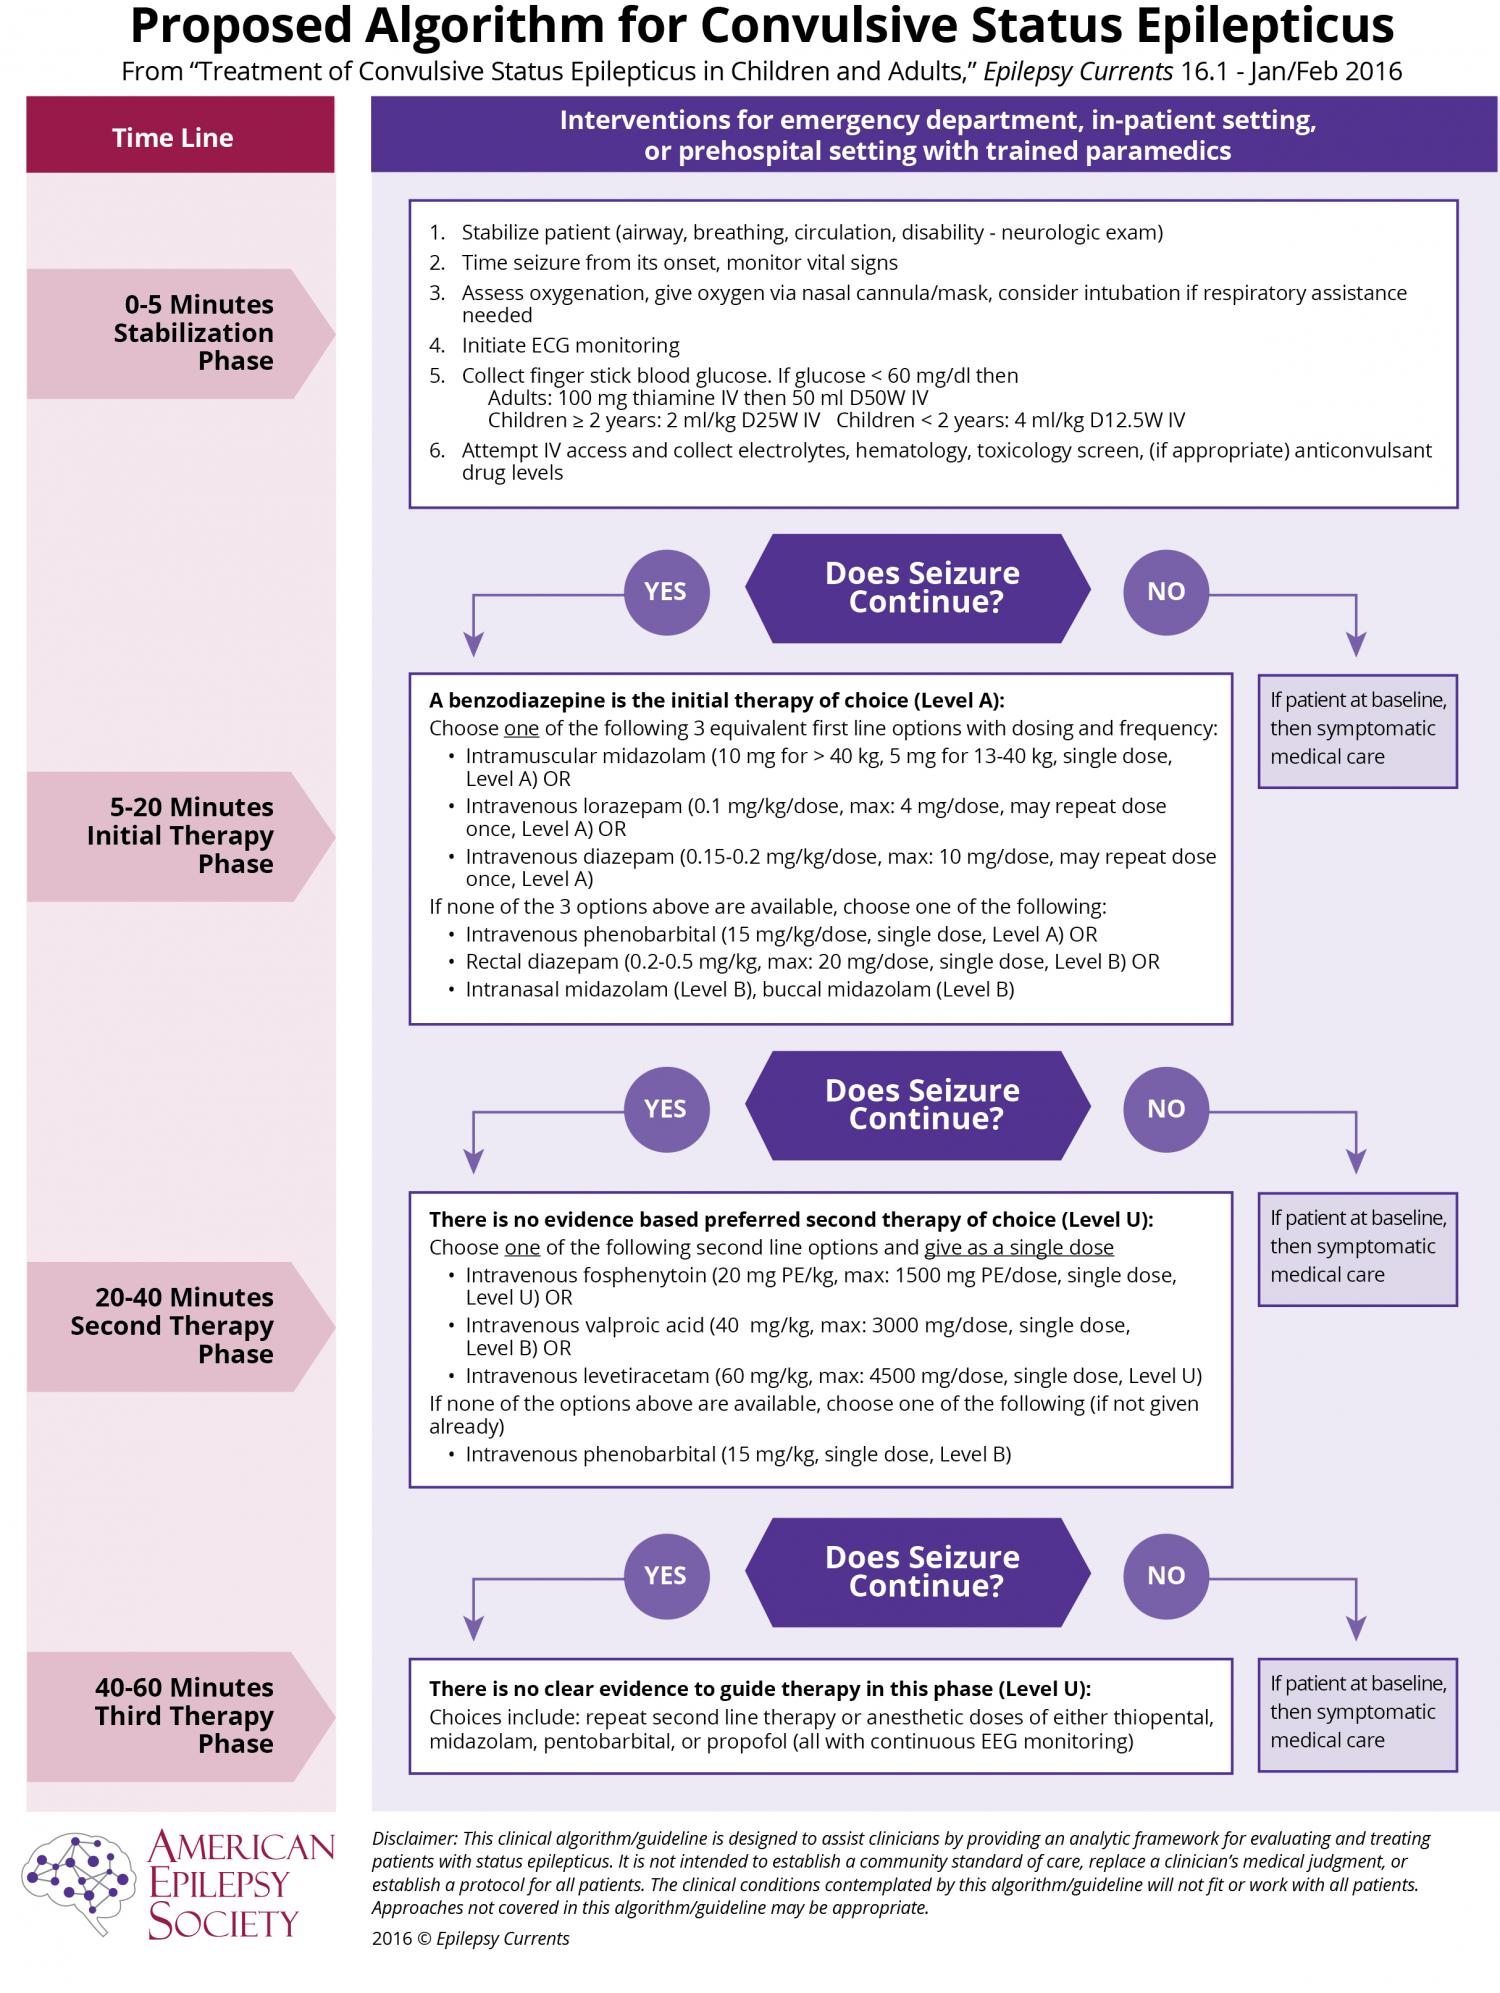 new-guideline-for-treatment-of-prolonged-seizures-in-children-and-adults